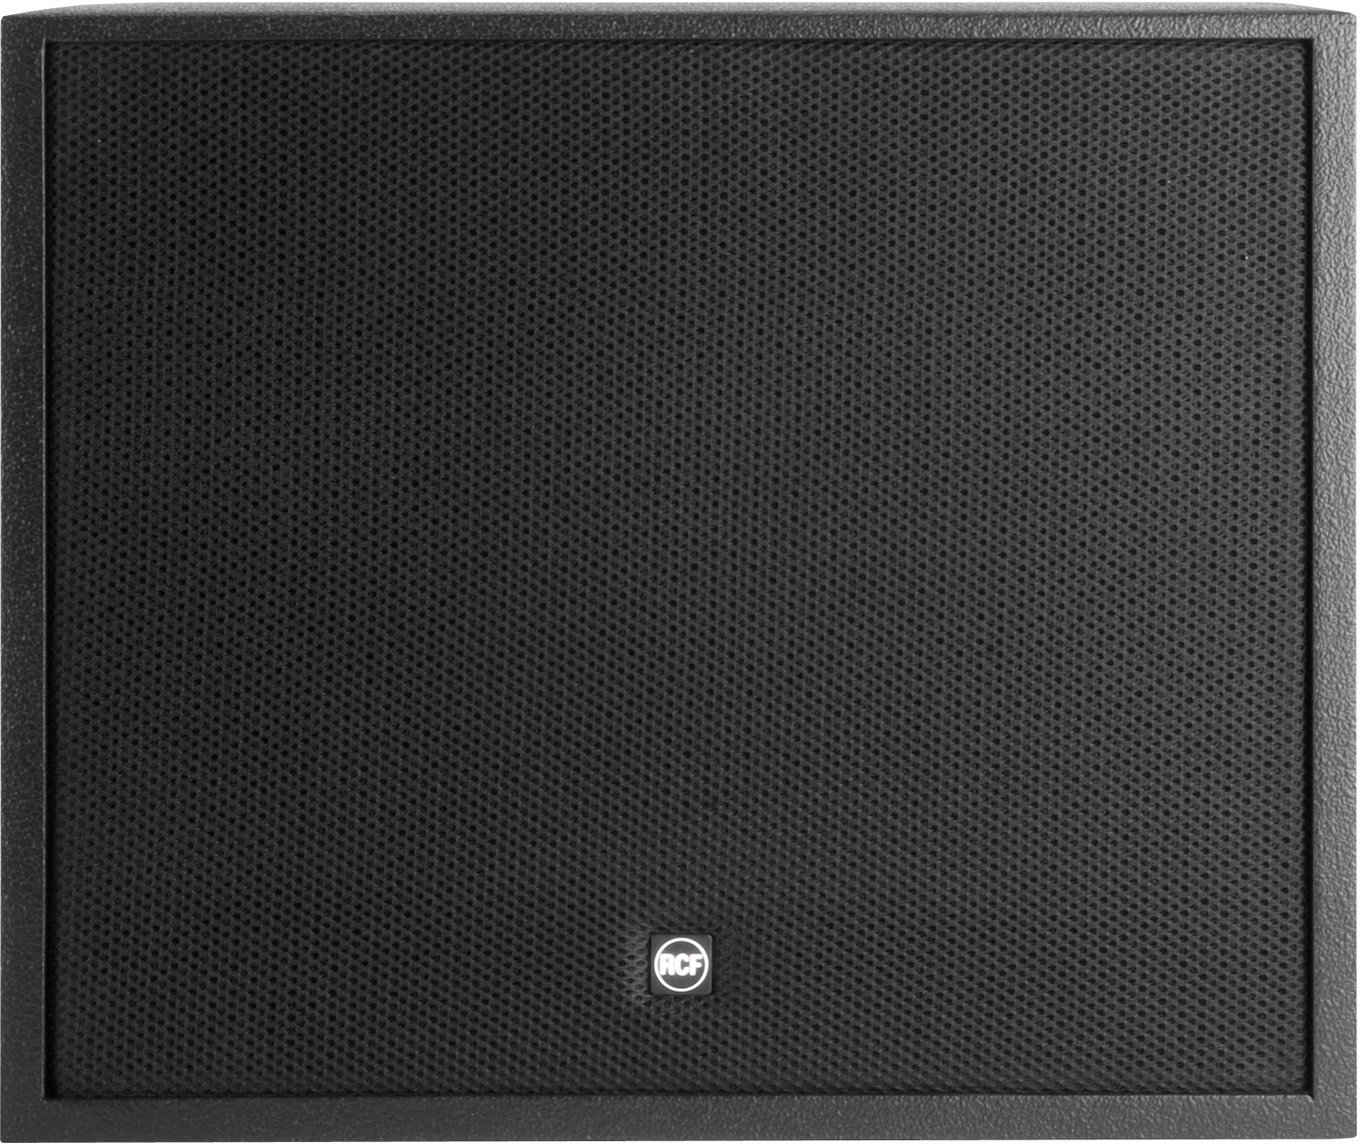 Passieve subwoofer RCF S 5012 Passieve subwoofer